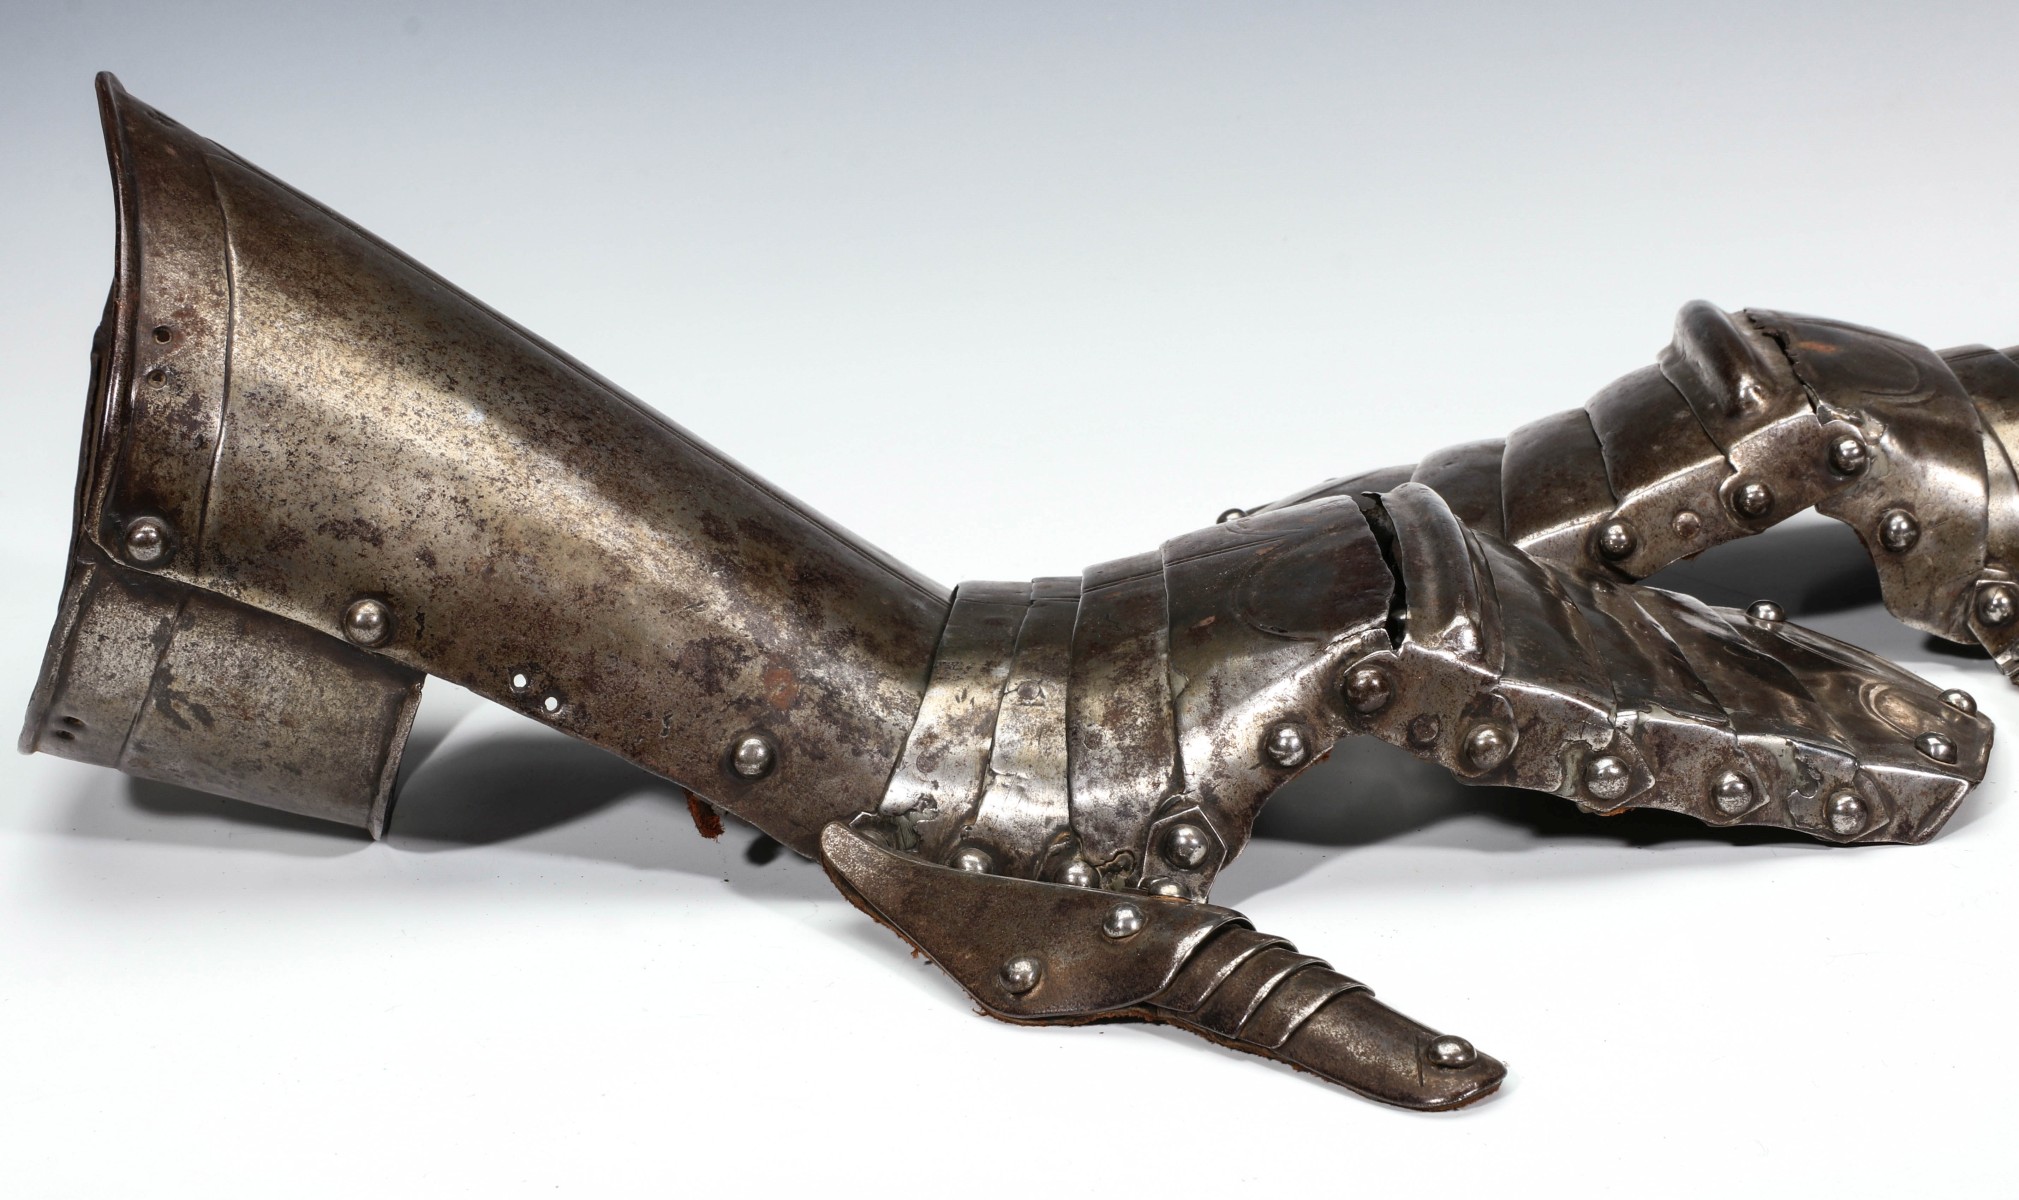 A PAIR LARGE ARMOR BRIDLE GAUNTLETS CIRCA 15TH CENTURY